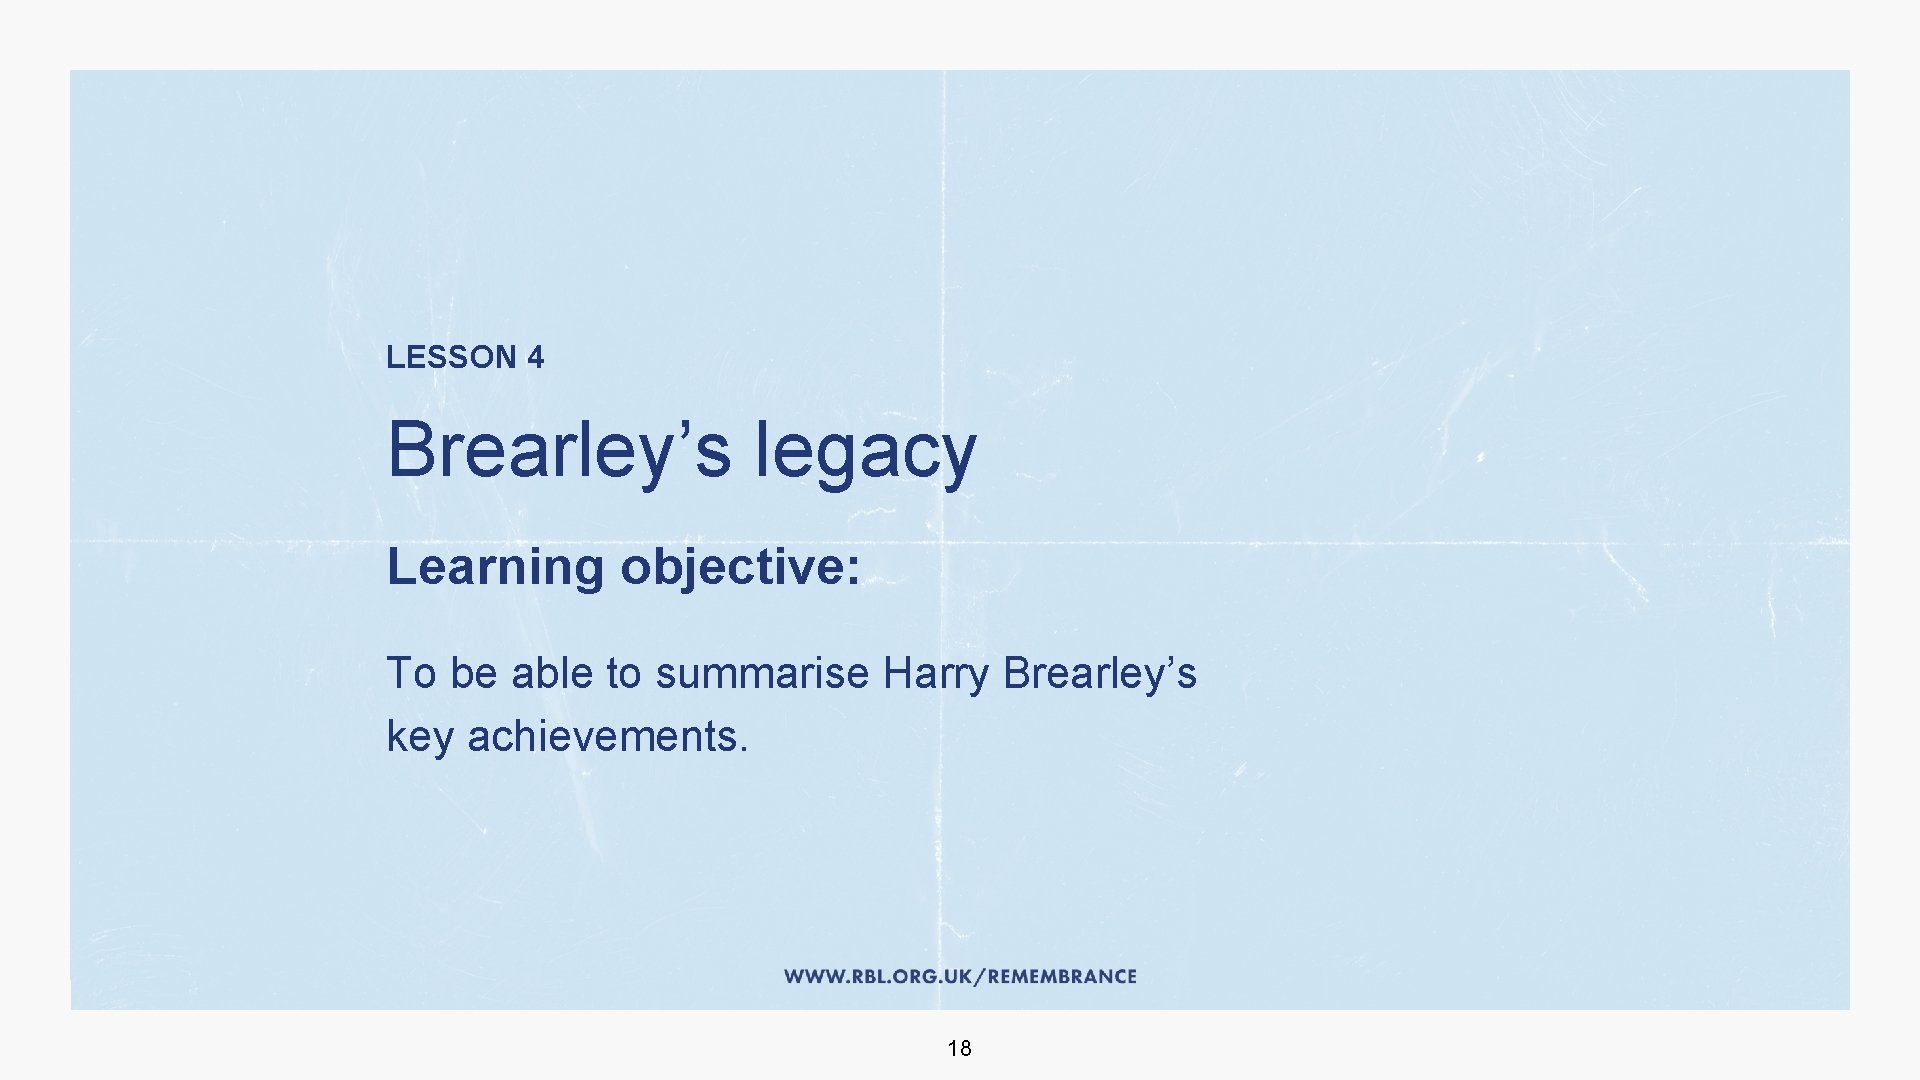 LESSON 4 Brearley’s legacy Learning objective: To be able to summarise Harry Brearley’s key